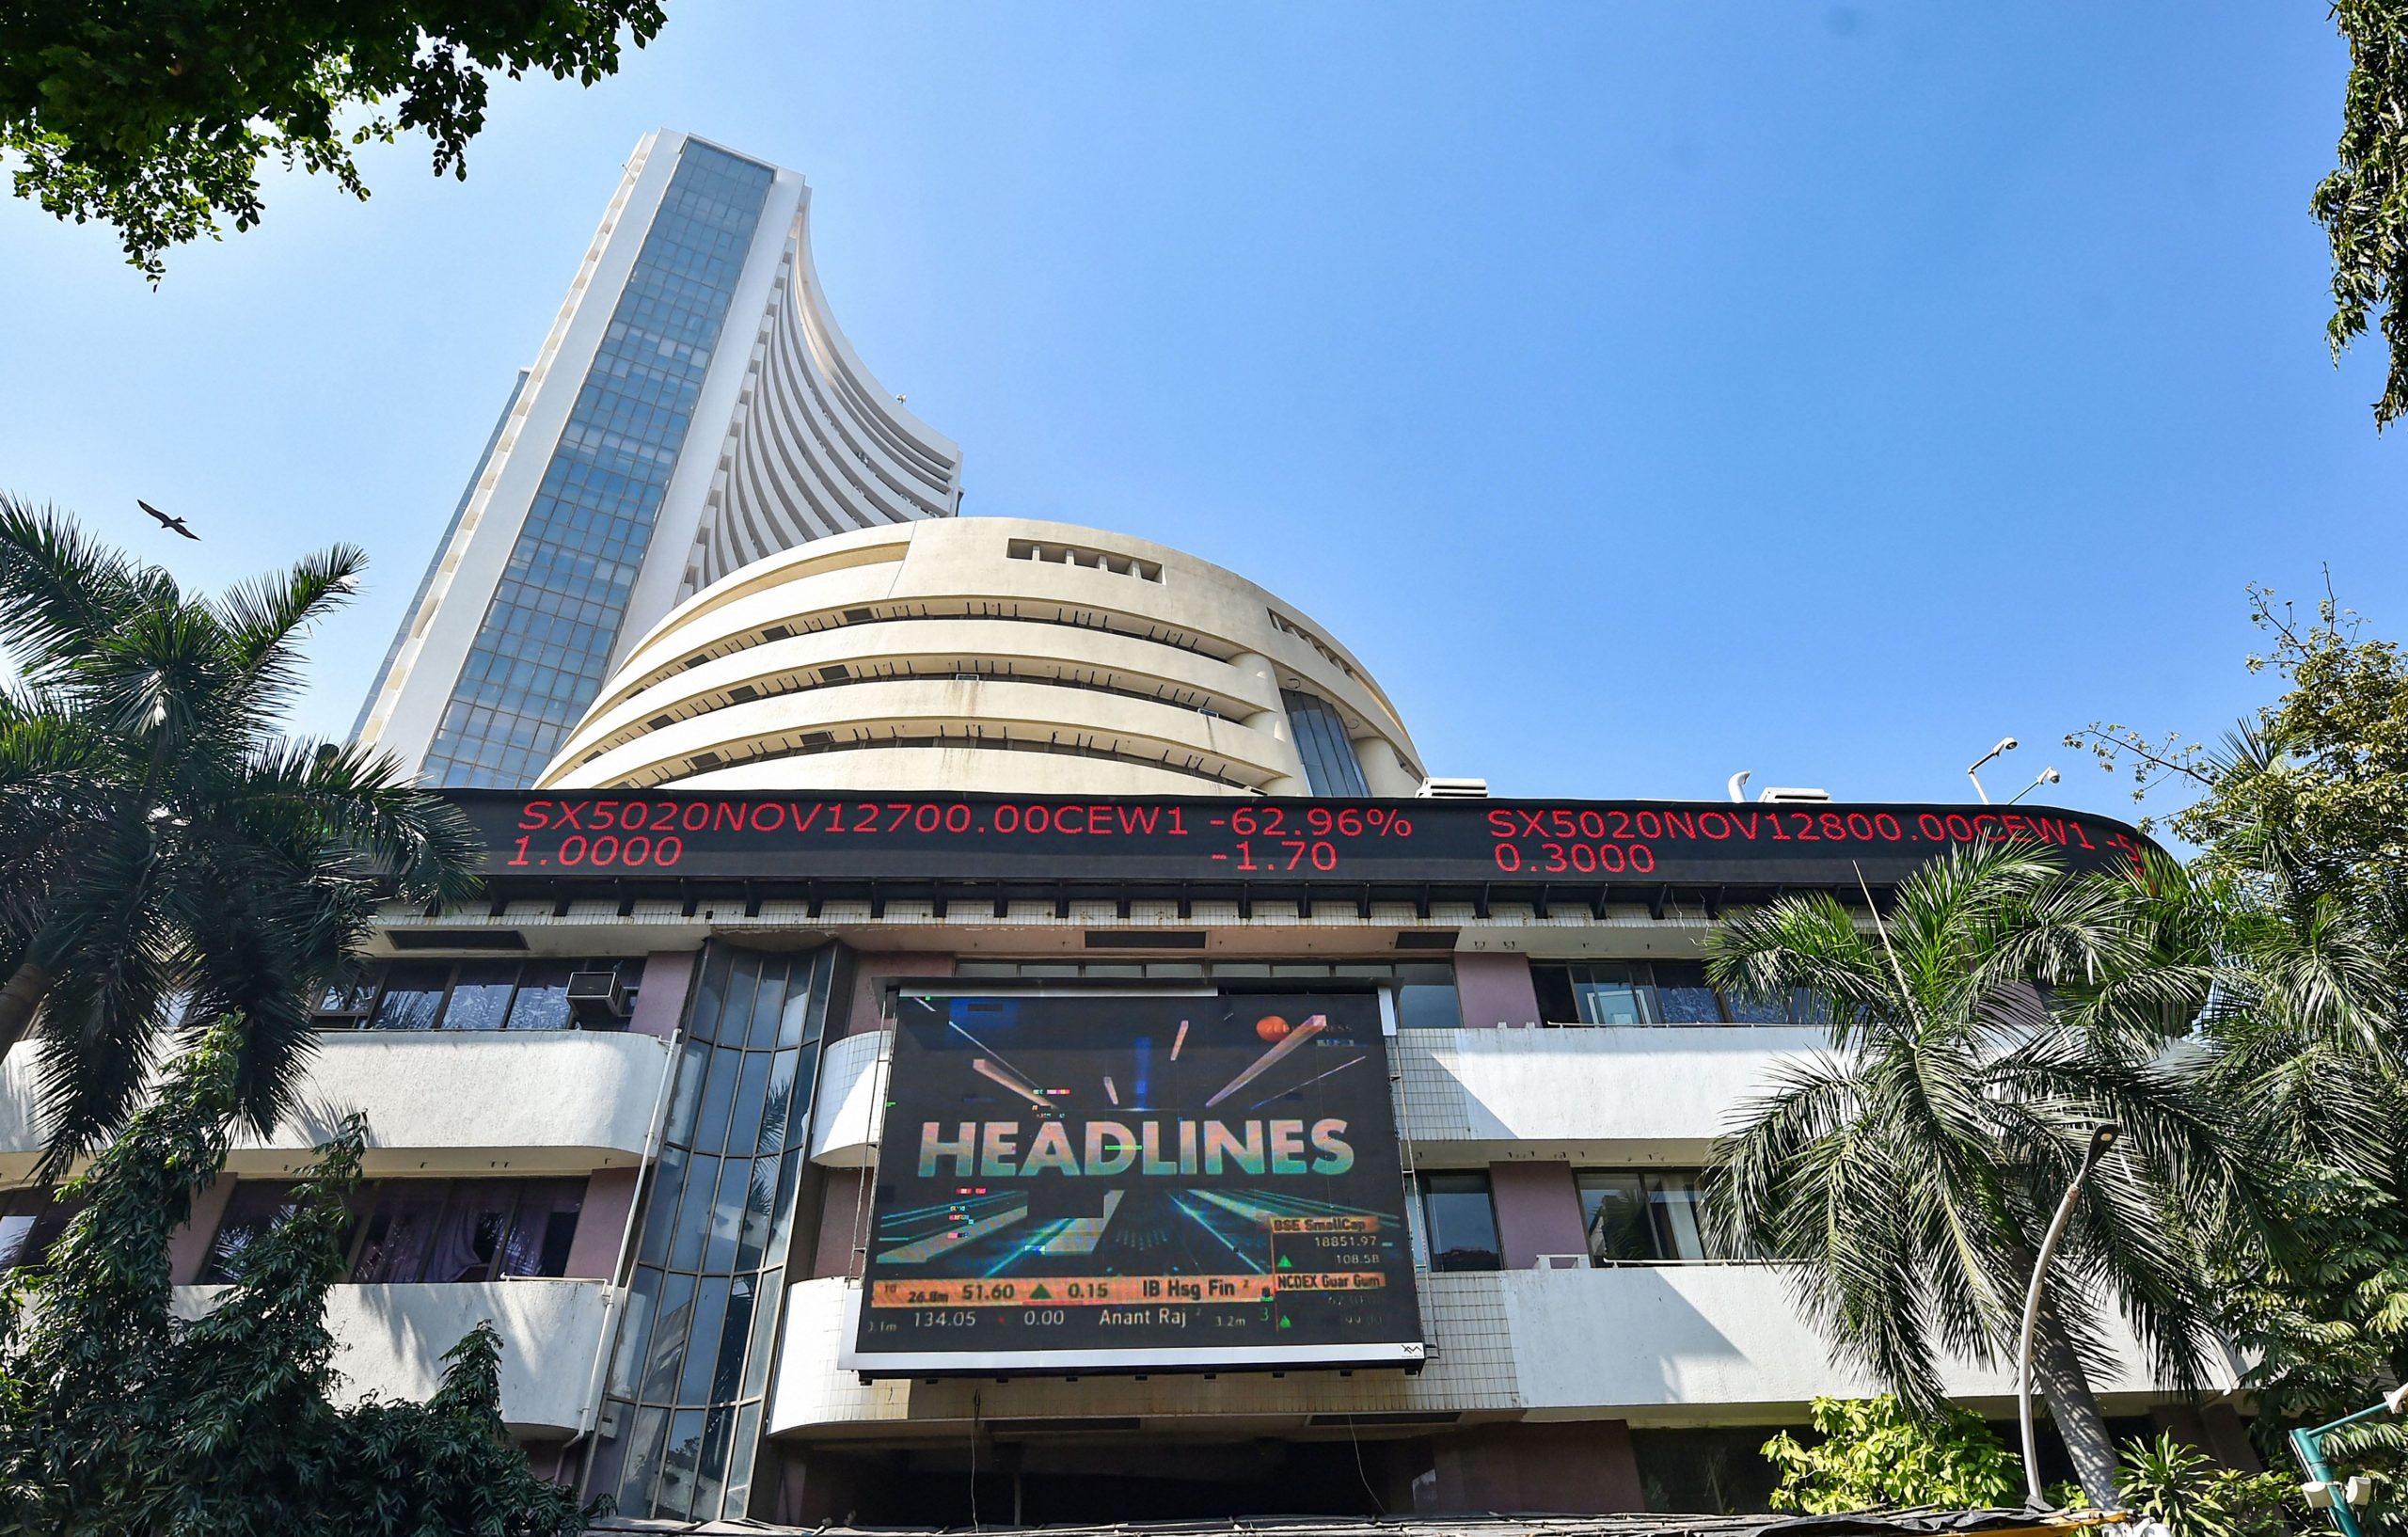 Trending Stocks: Oil India, RIL, HDFC, Indiabulls and others in news today